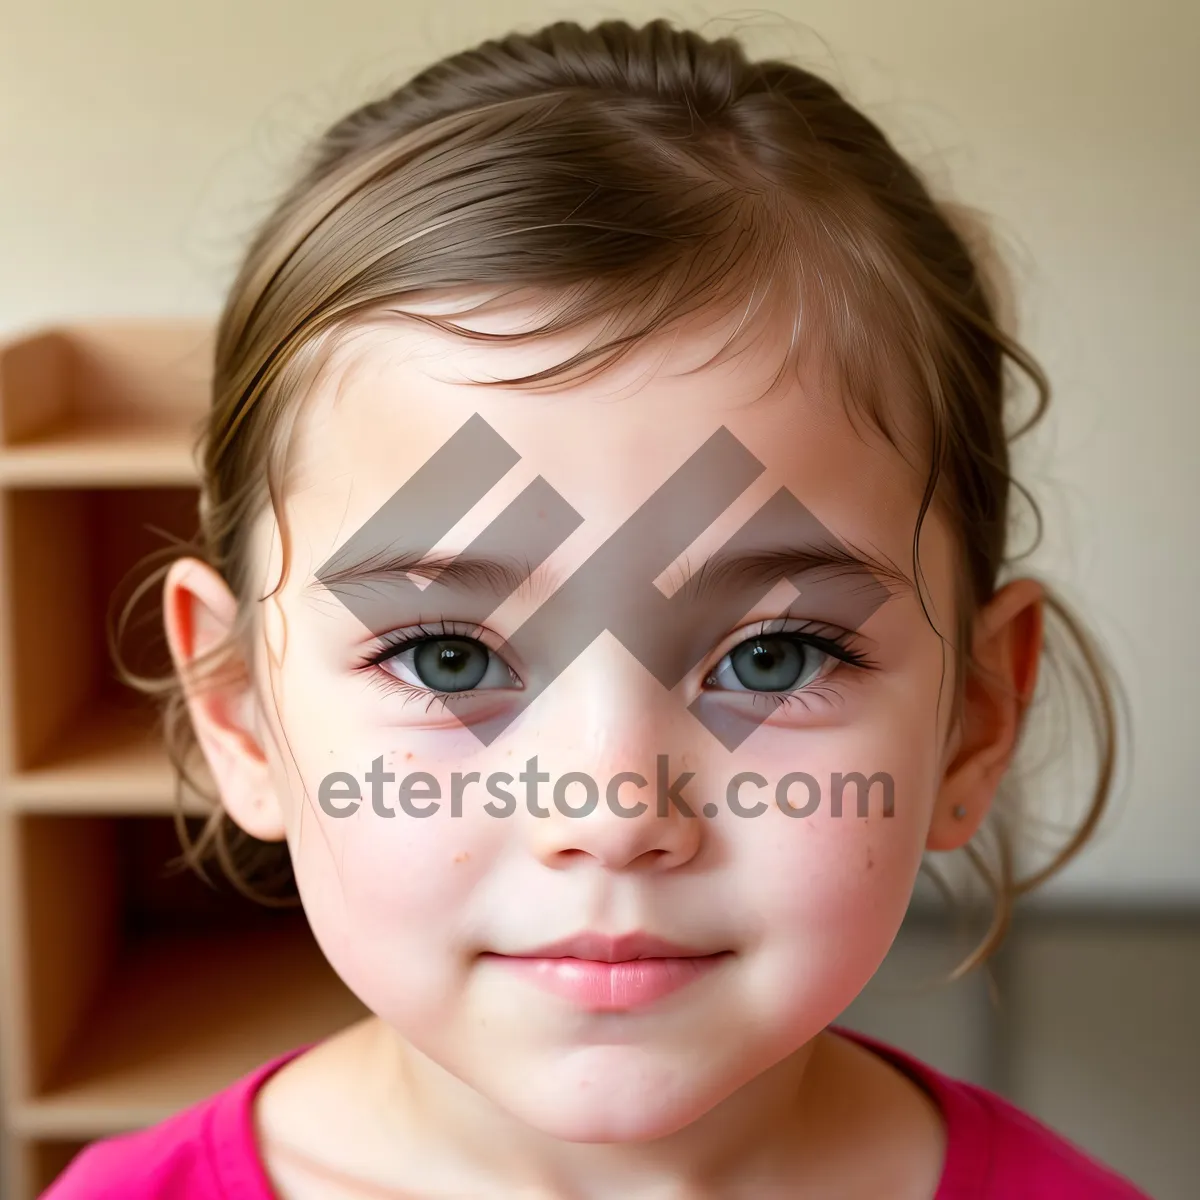 Picture of Adorable child with bright, happy eyes and toothbrush